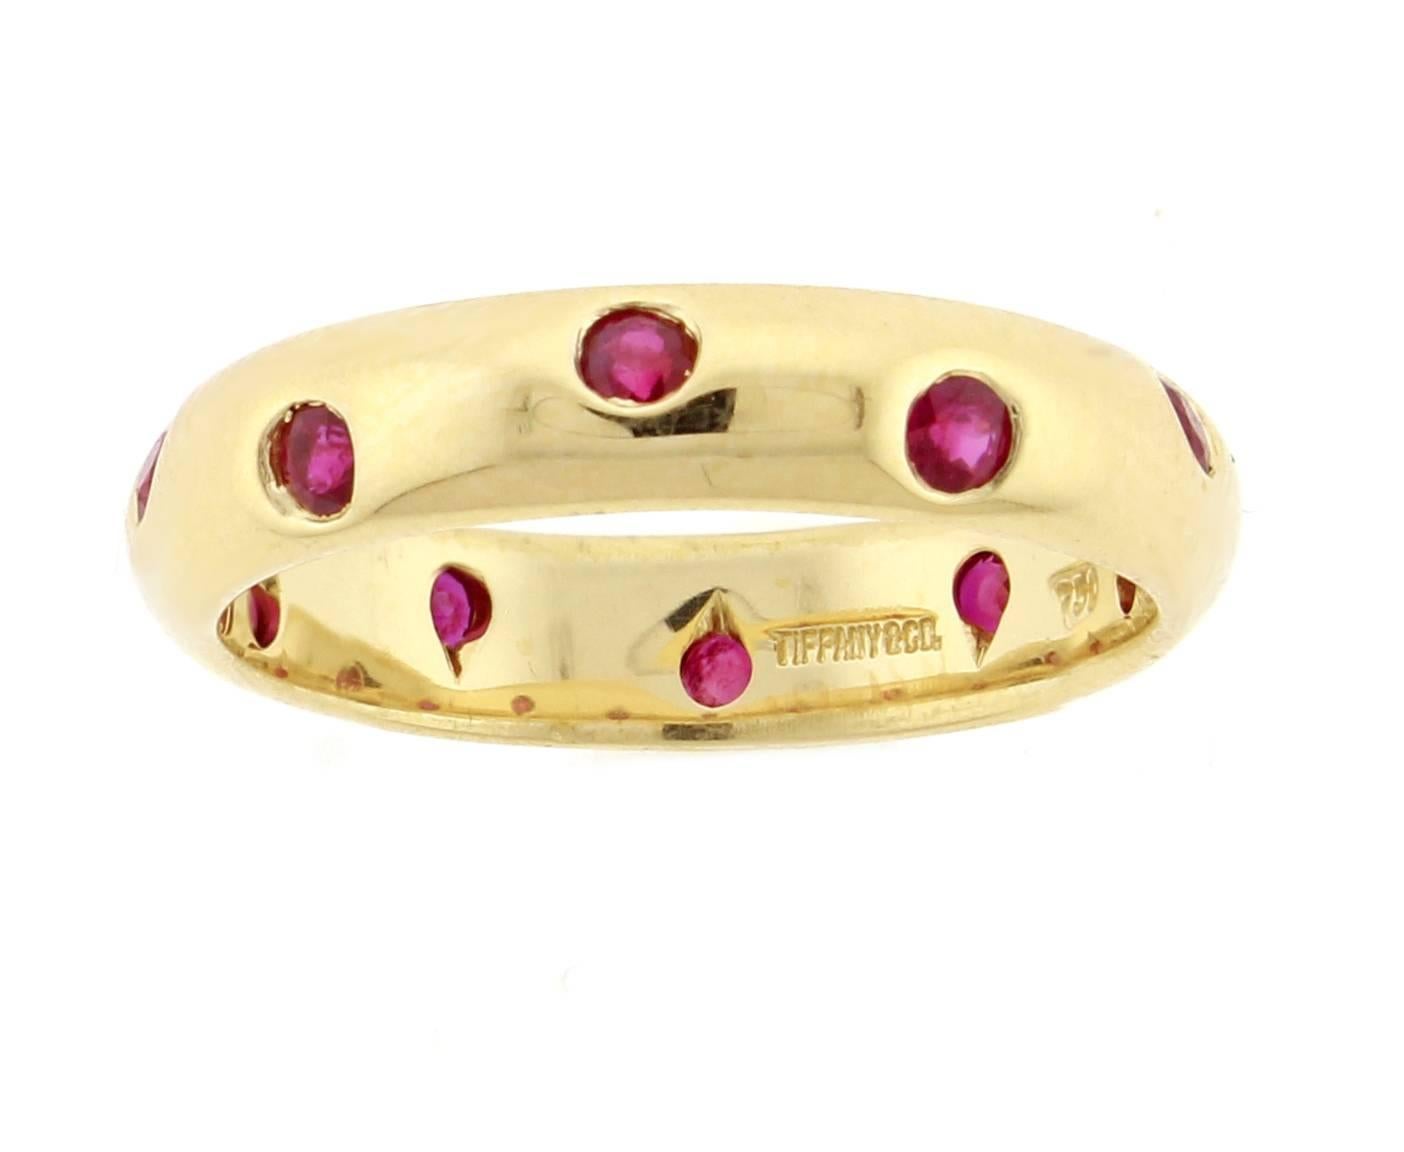 From Tiffany & Co. a ruby band ring from their Etoile collection. Set with 10 bezel set red rubies in a 4.3mm 18 karat yellow gold ring. Size 6.5